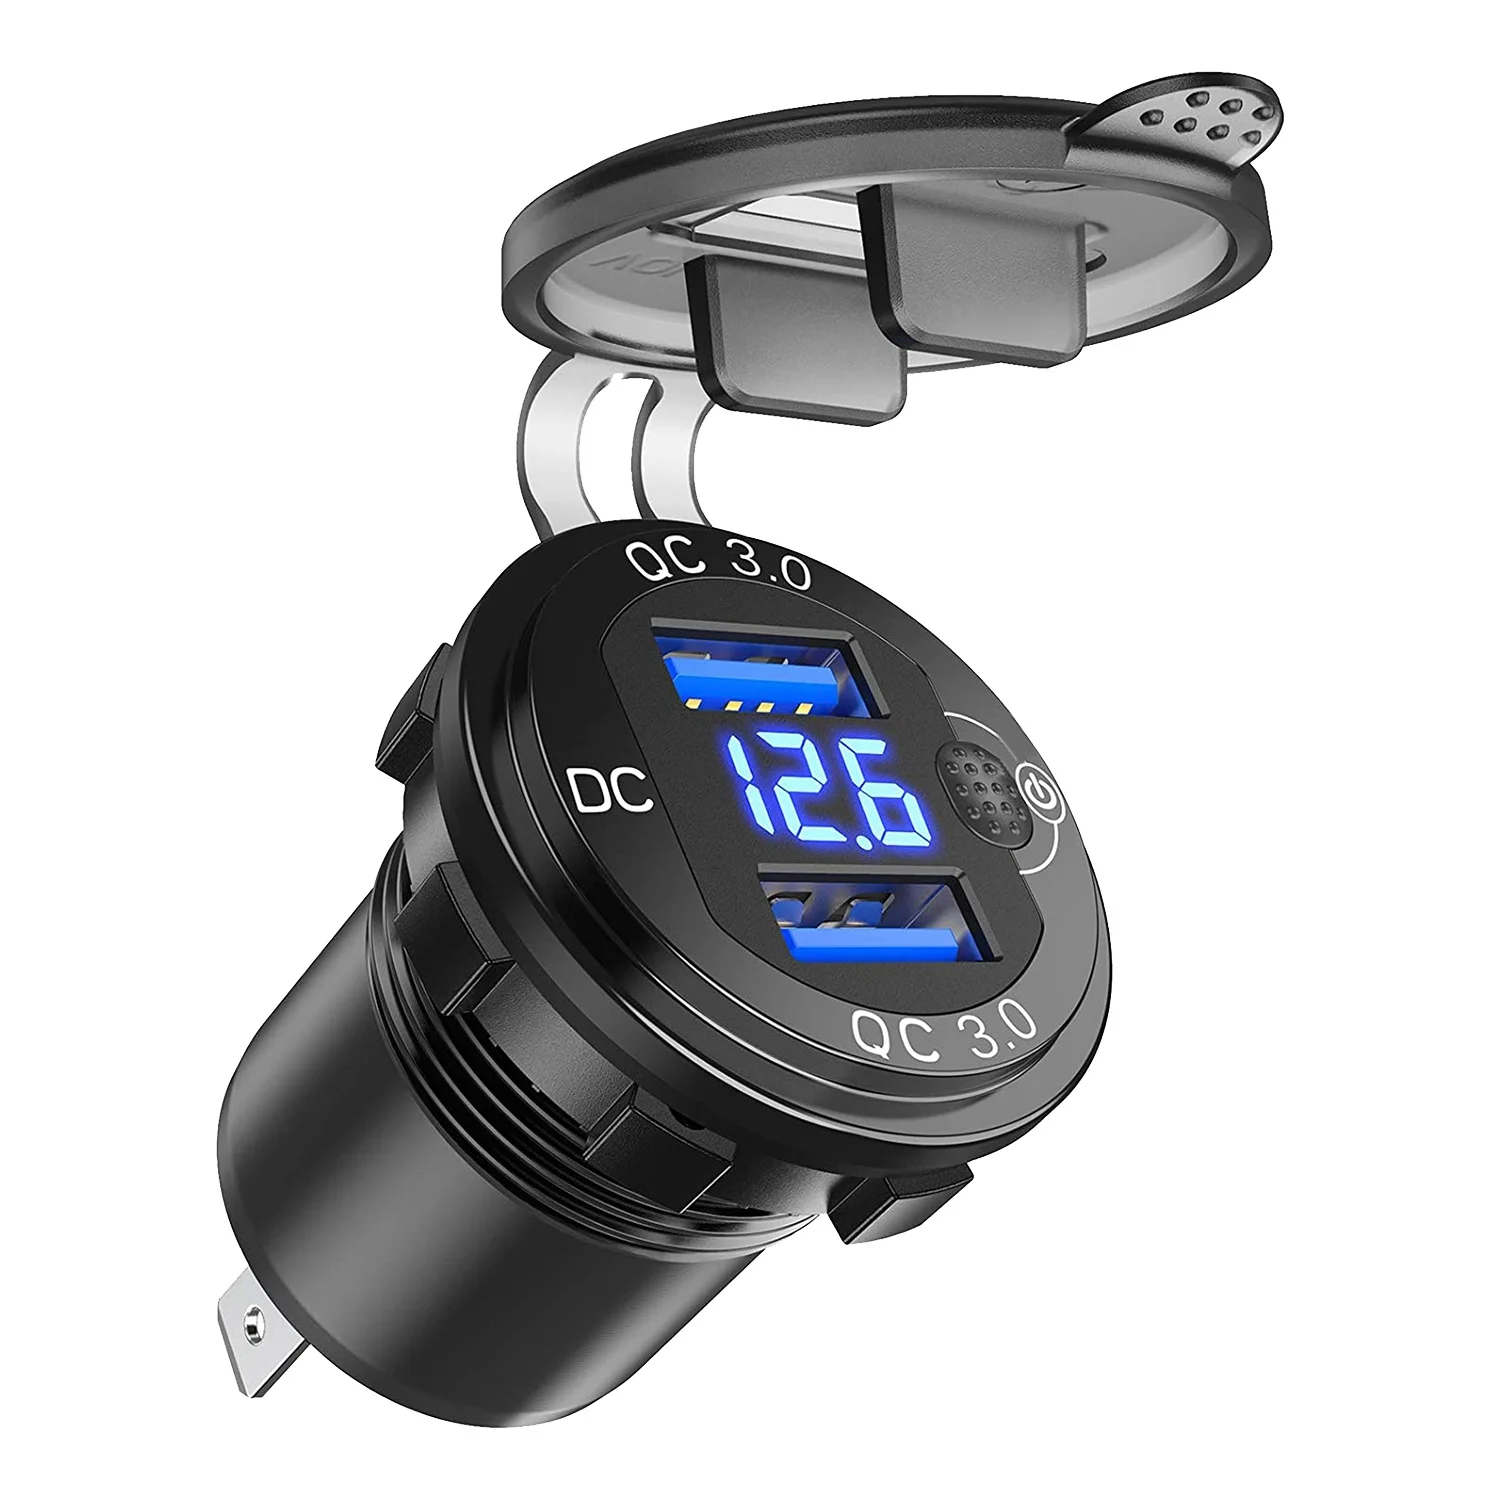 

Quick Charge 3.0 Dual USB Car Charger with Voltmeter & ON/OFF Switch,36W 12V USB Outlet Fast Charger for Car Boat Marine